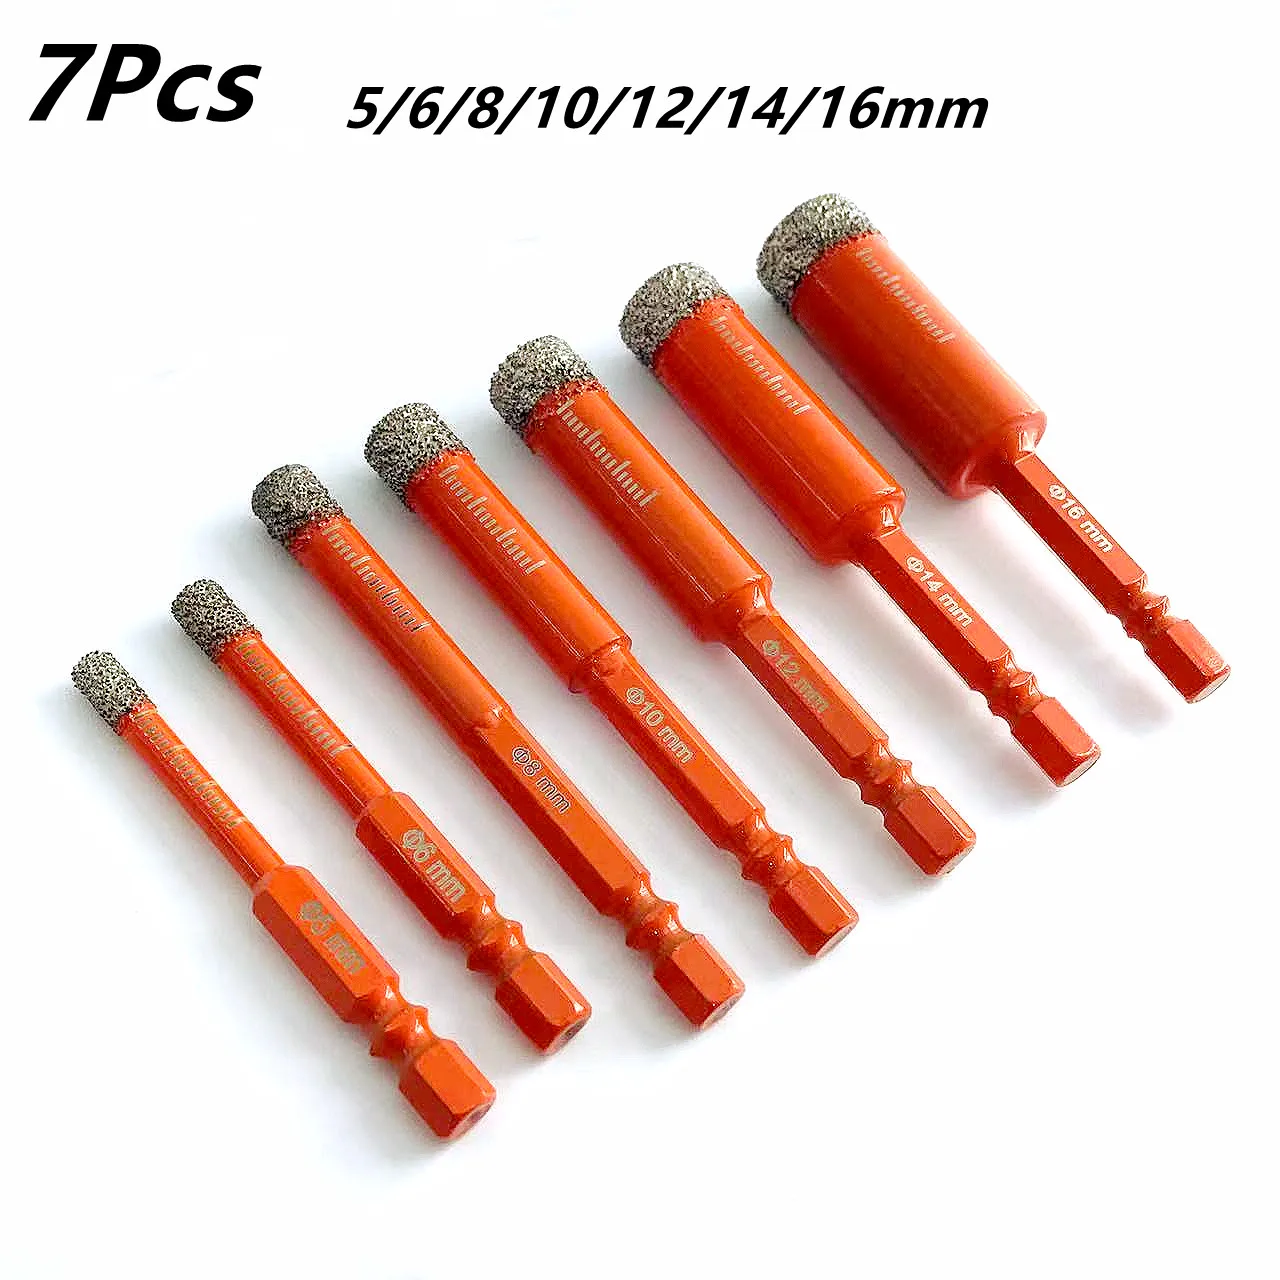 Dry Diamond Drill Bits Set for Granite Ceramic Marble Tile Stone Glass Hard Material Hex Shank Masonry Hole Saw Drill Bit 5-16mm vearter 6 16mm 1 4 hex handle vacuum brazed diamond dry drill bits hole saw cutter for granite marble ceramic tile glass stone